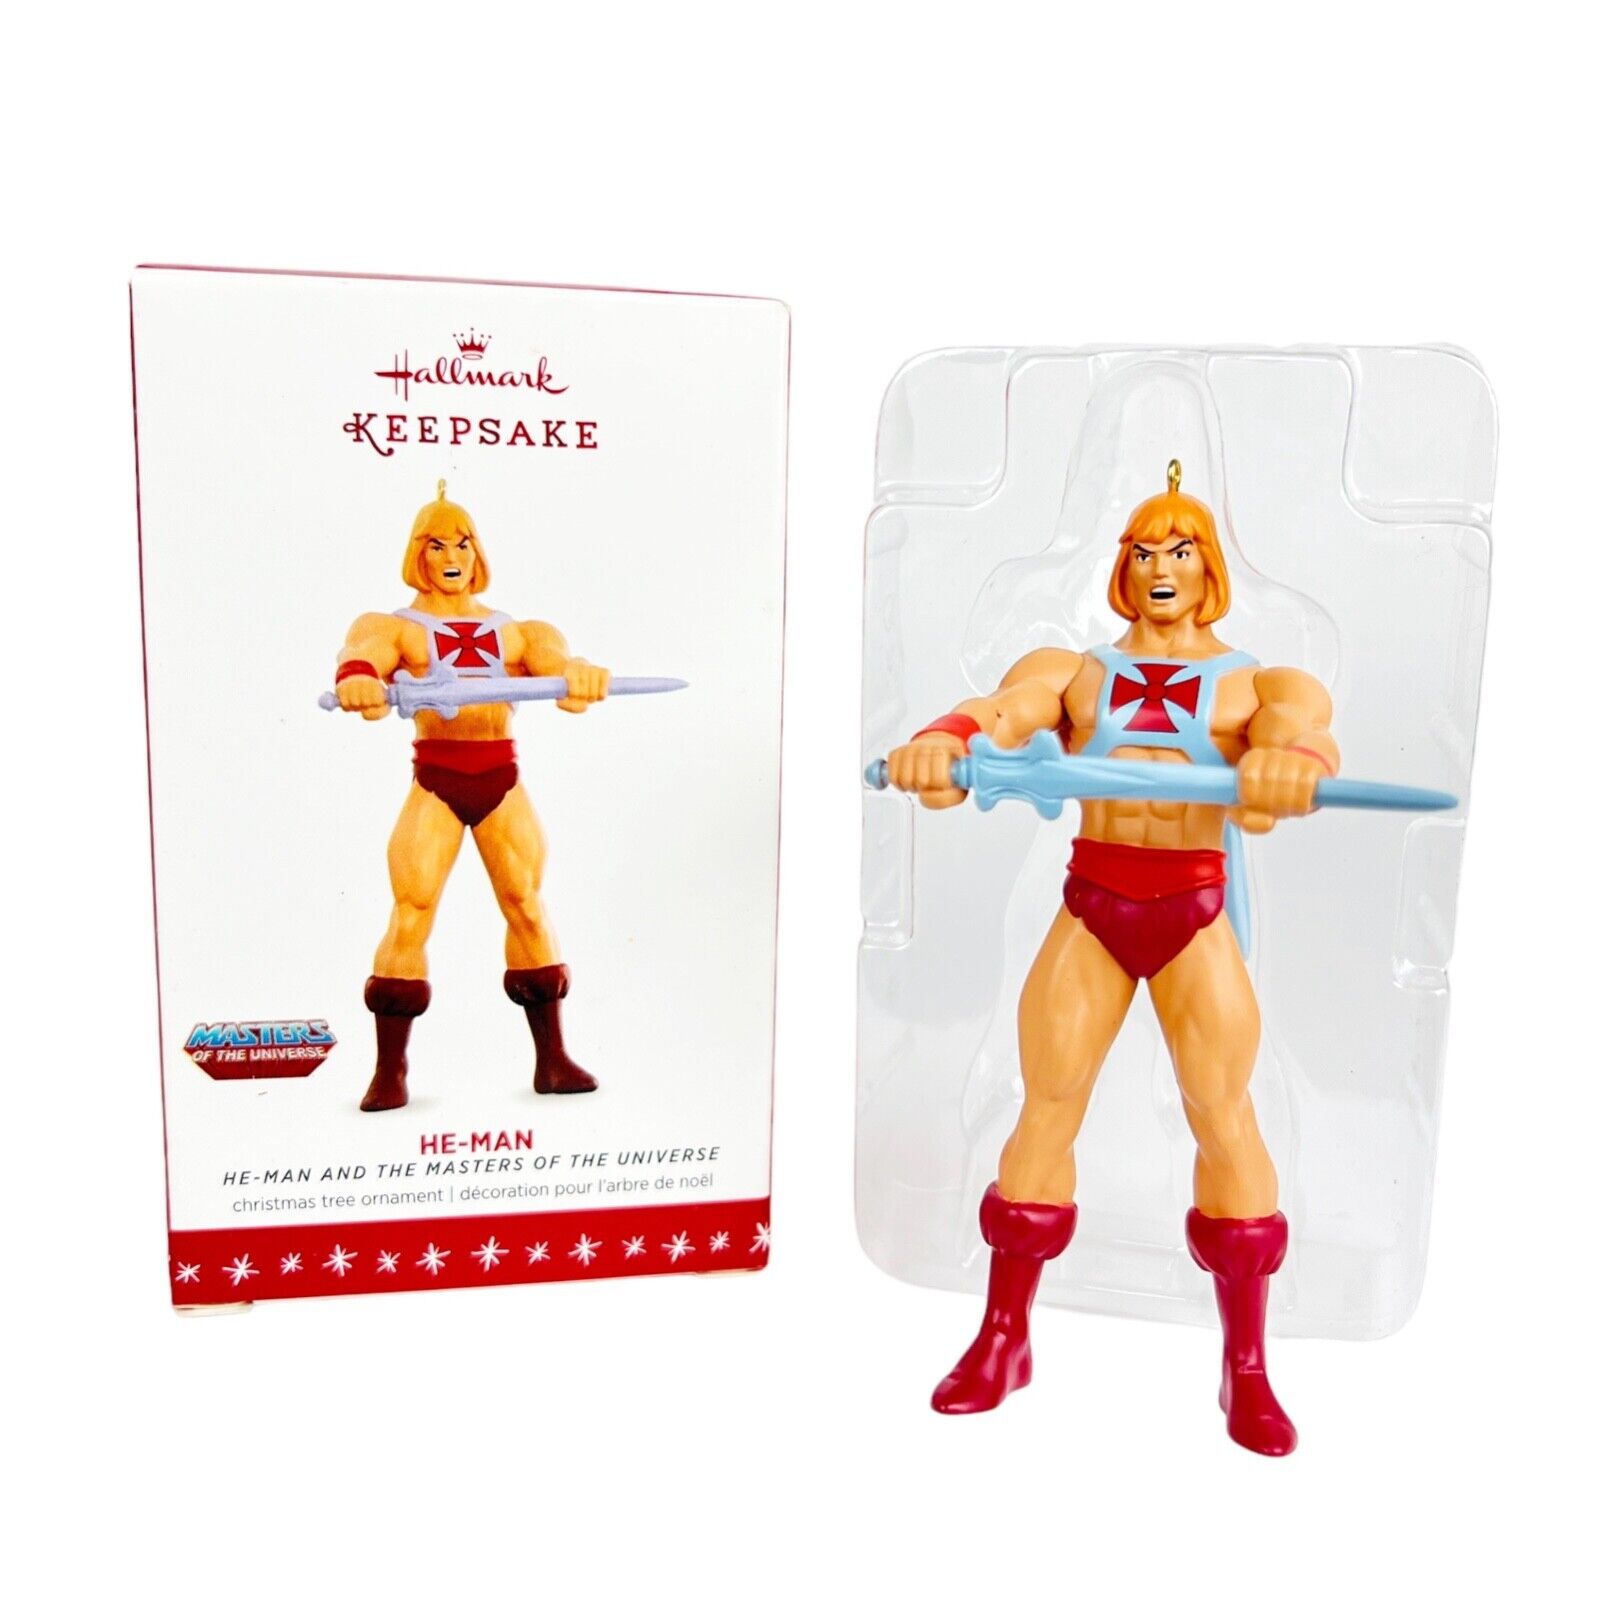 2016 Hallmark Keepsake Ornament He-Man and the Masters Of The Universe NEW